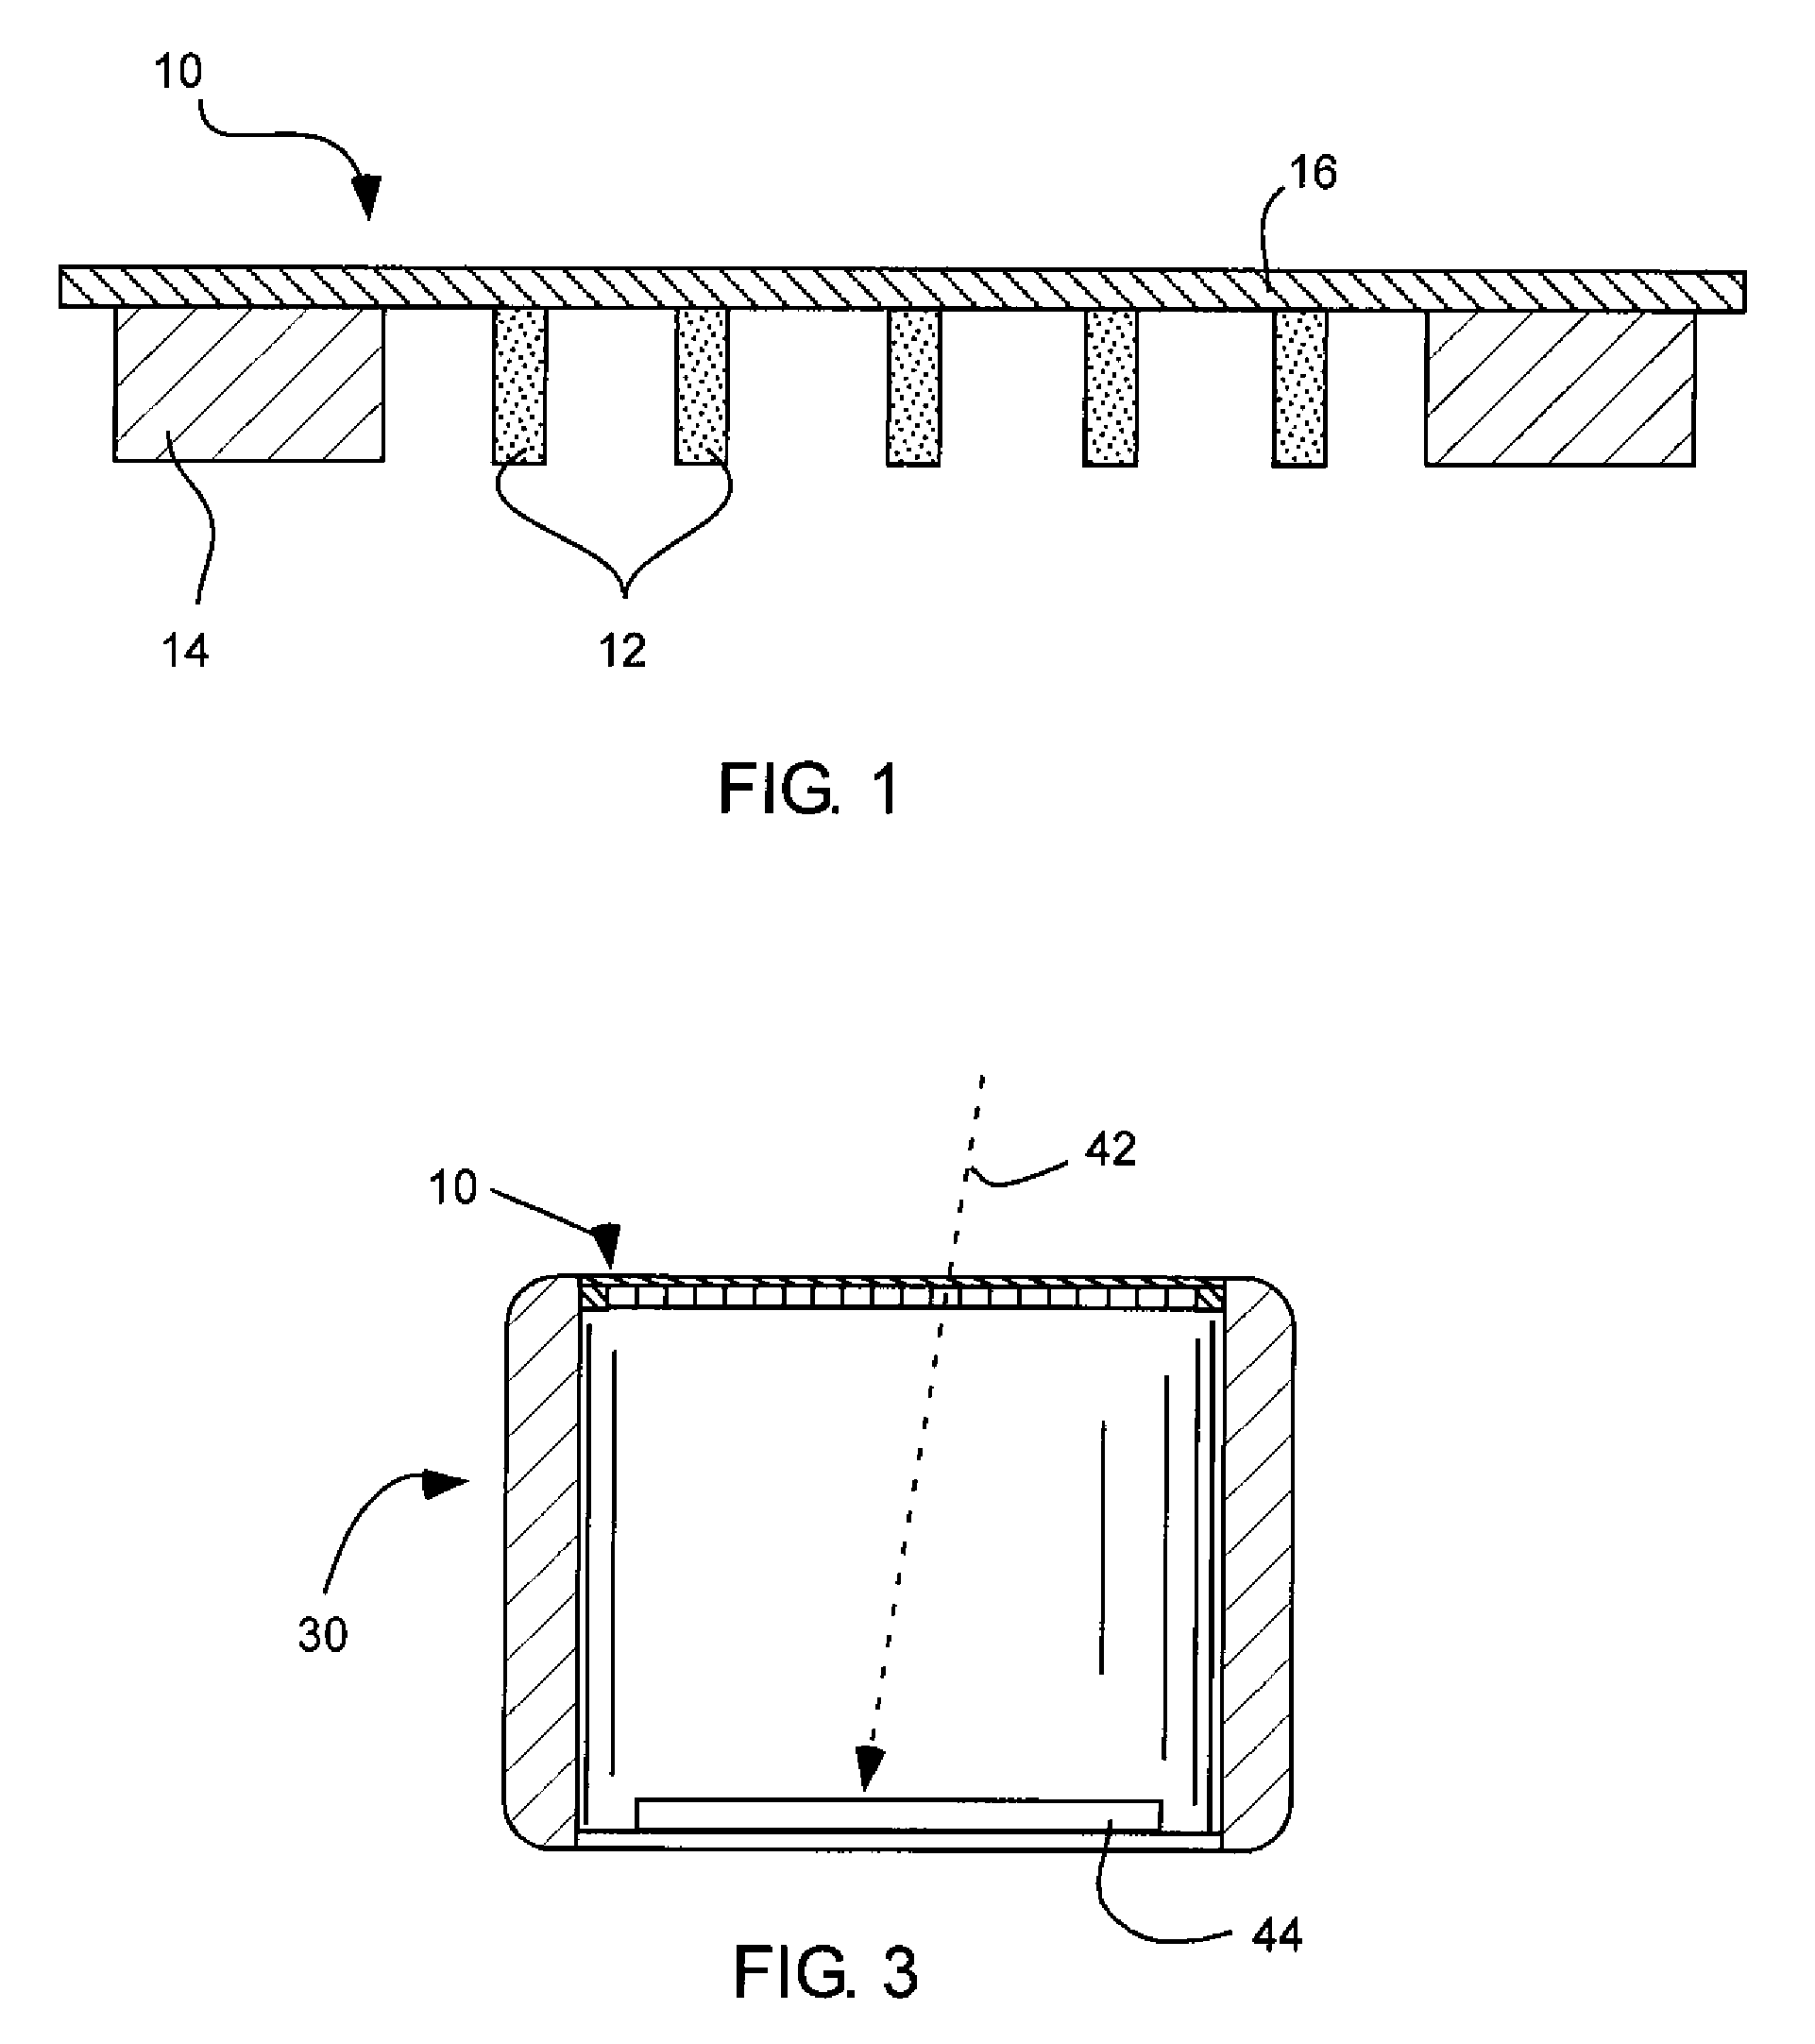 X-ray window with grid structure